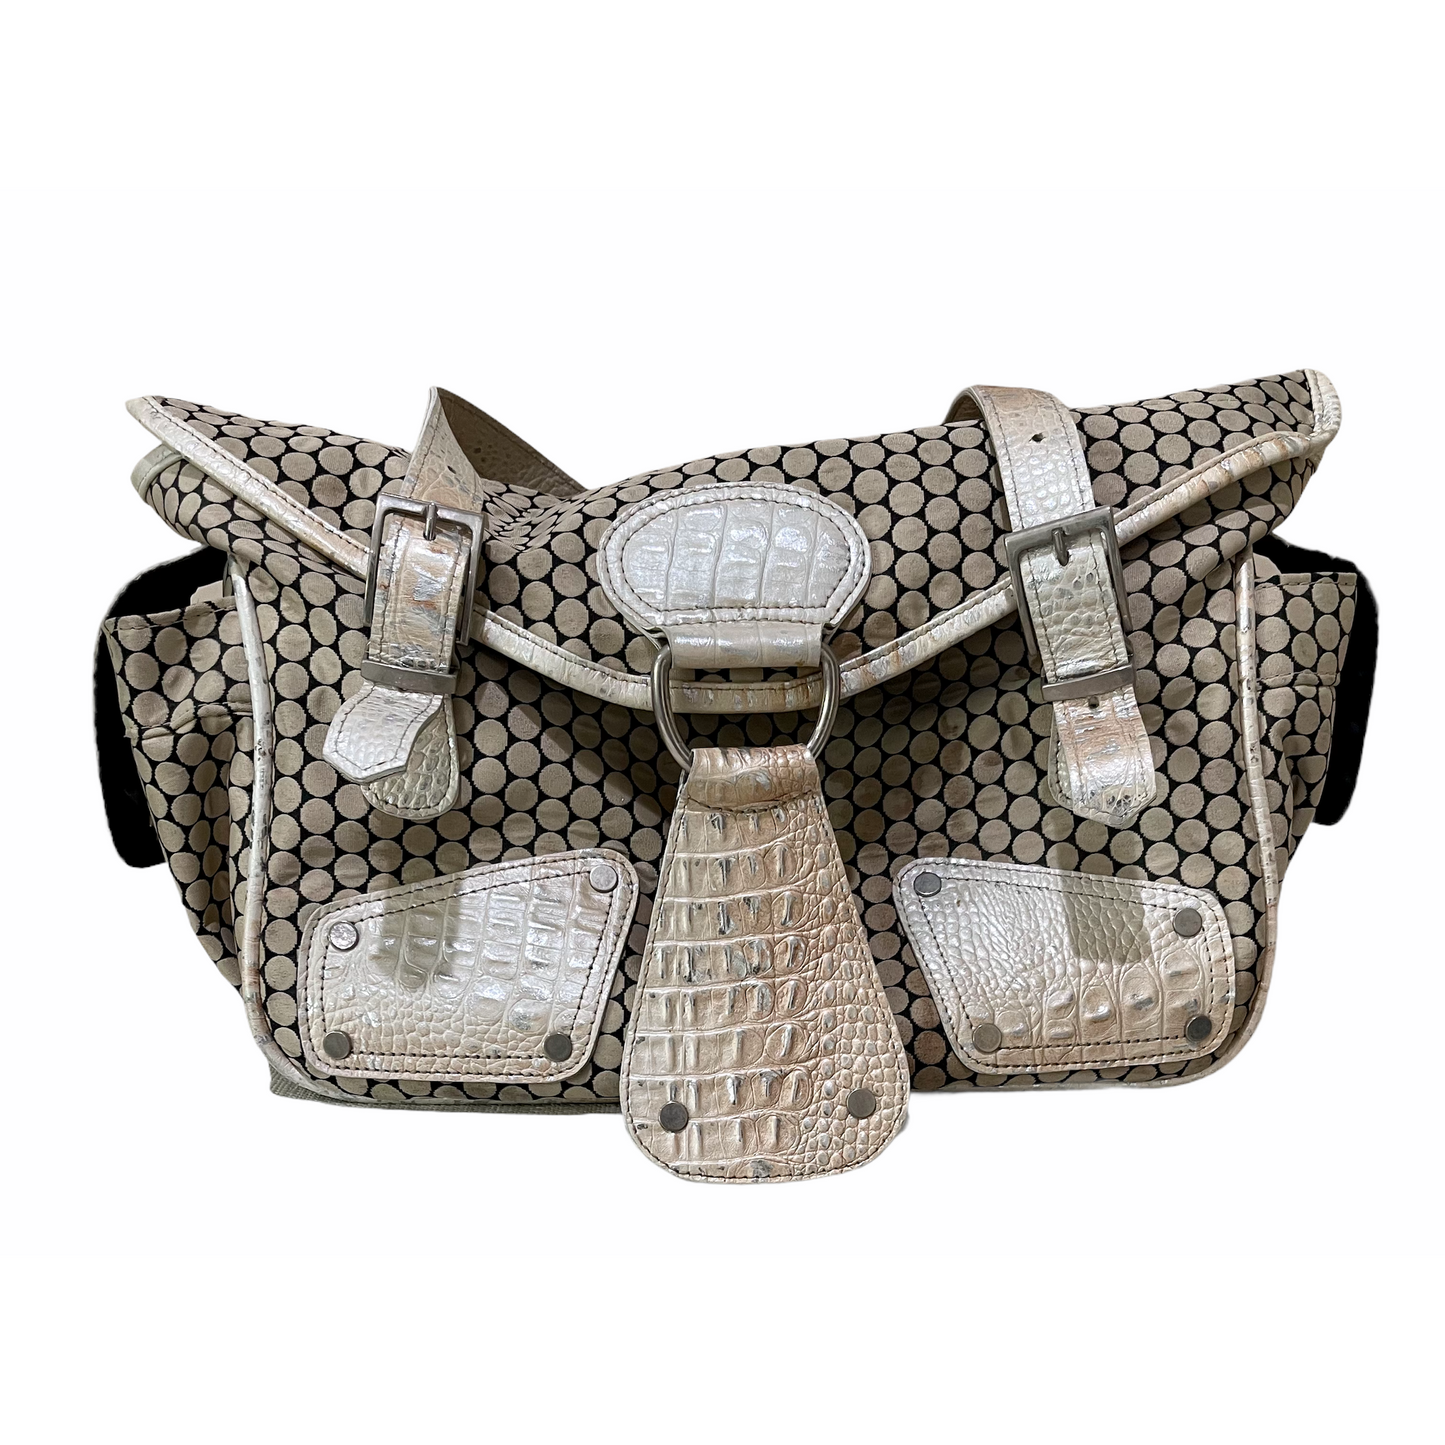 Bag-Couture Diaper Bag By Mia Boss